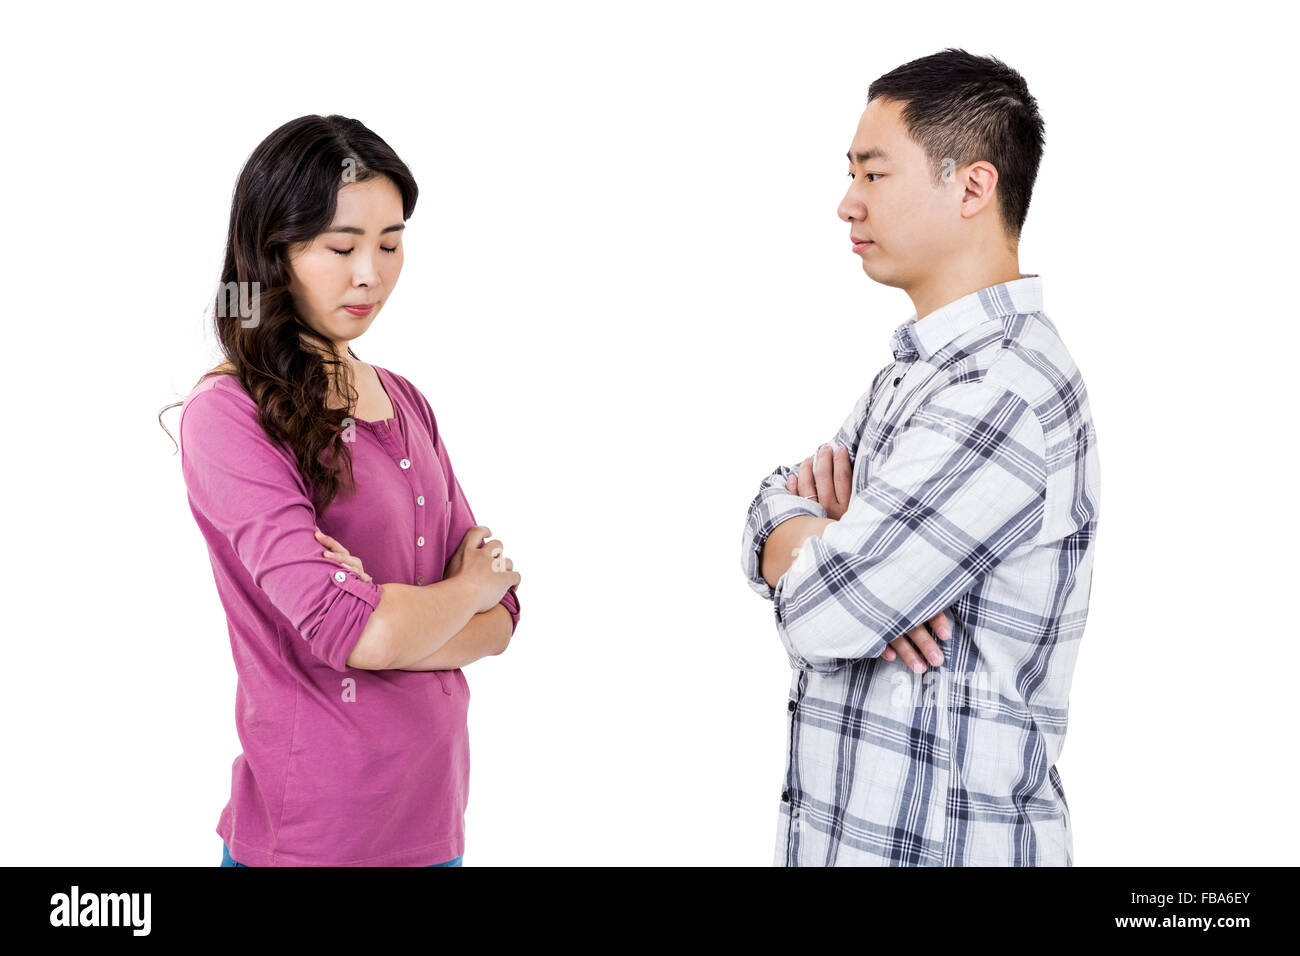 Upset couple standing with arms crossed Stock Photo